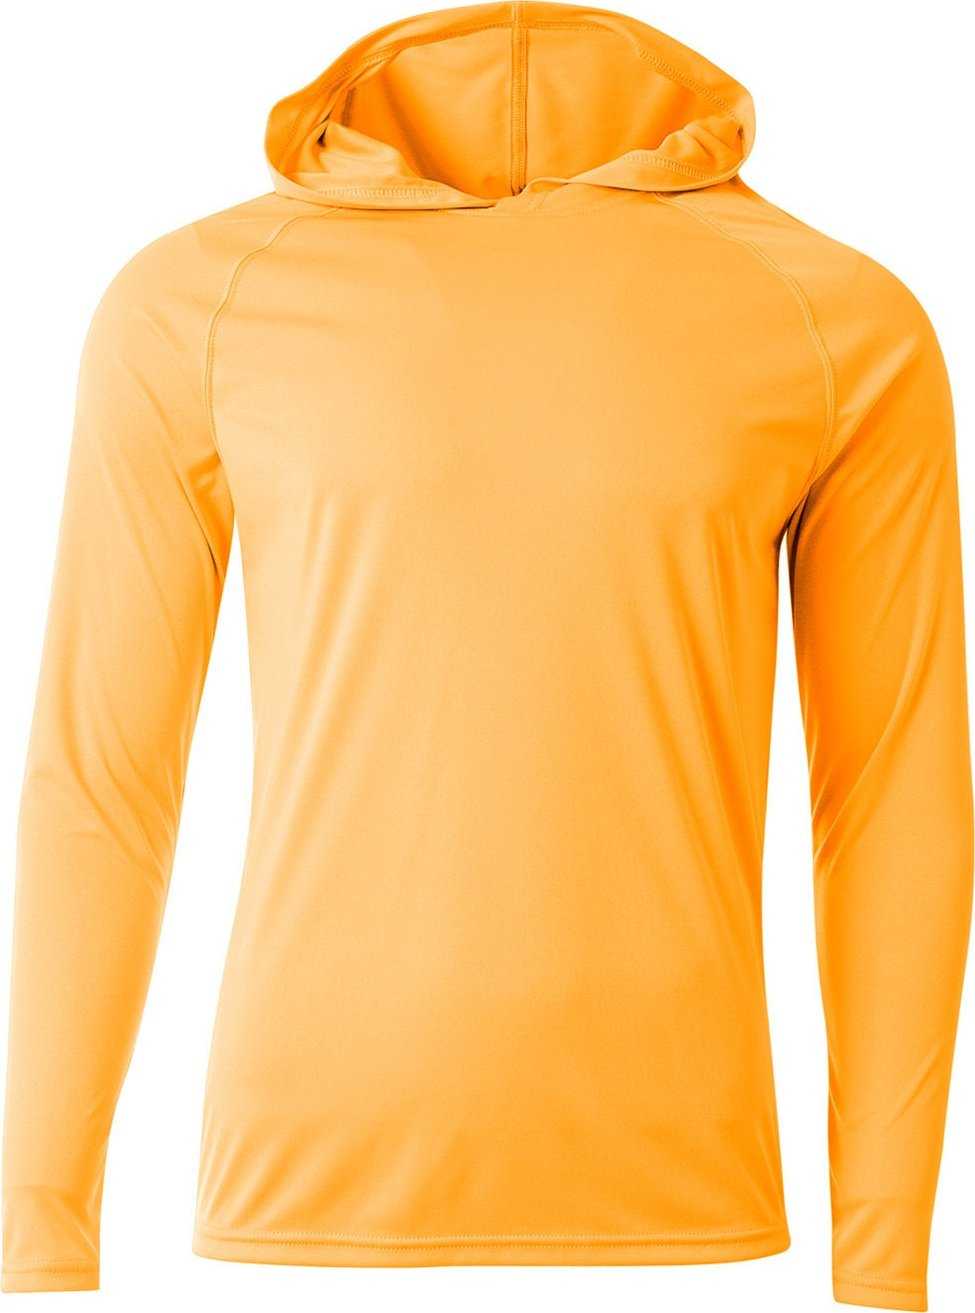 A4 NB3409 Youth Long Sleeve Hooded T-Shirt - Safety Orange